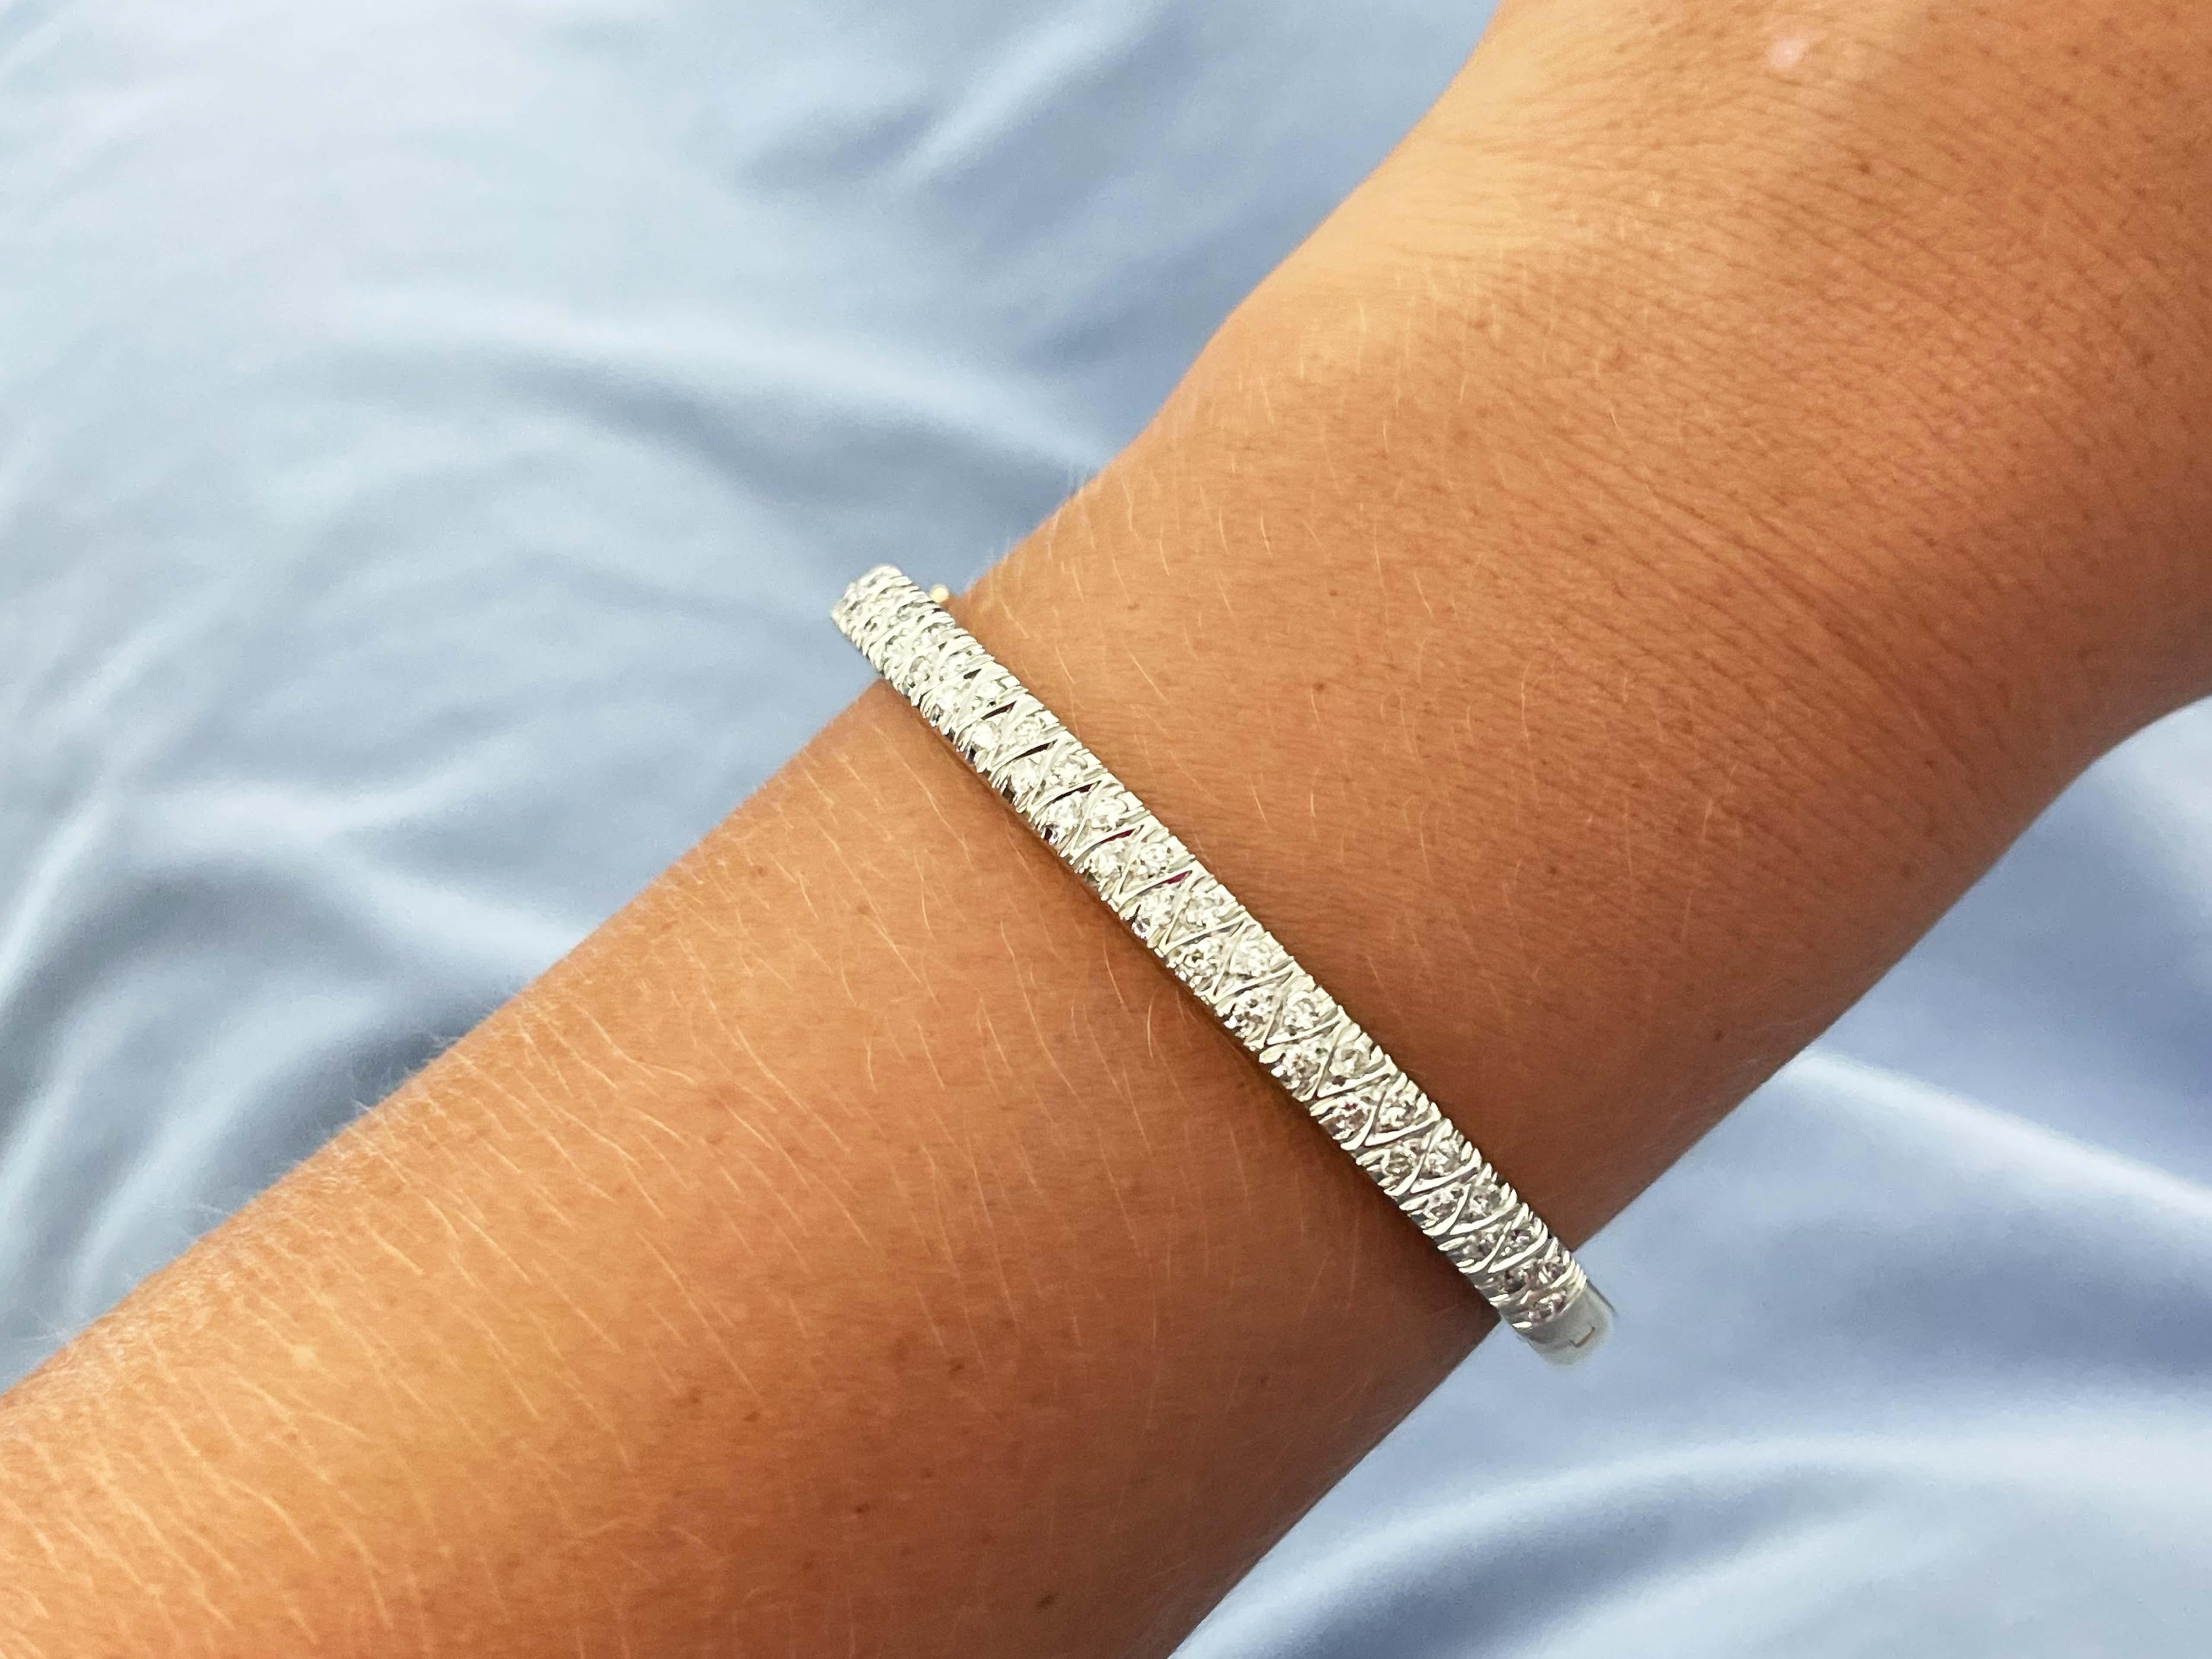 Bracelet Specifications:

Metal: 14k Yellow Gold, diamonds are set around 14k white gold

Diamond Count: 44

Diamond Color: G-H

Diamond Clarity: SI

Diamond Carat Weight: 1.32

Inside Measurements: ~2.25